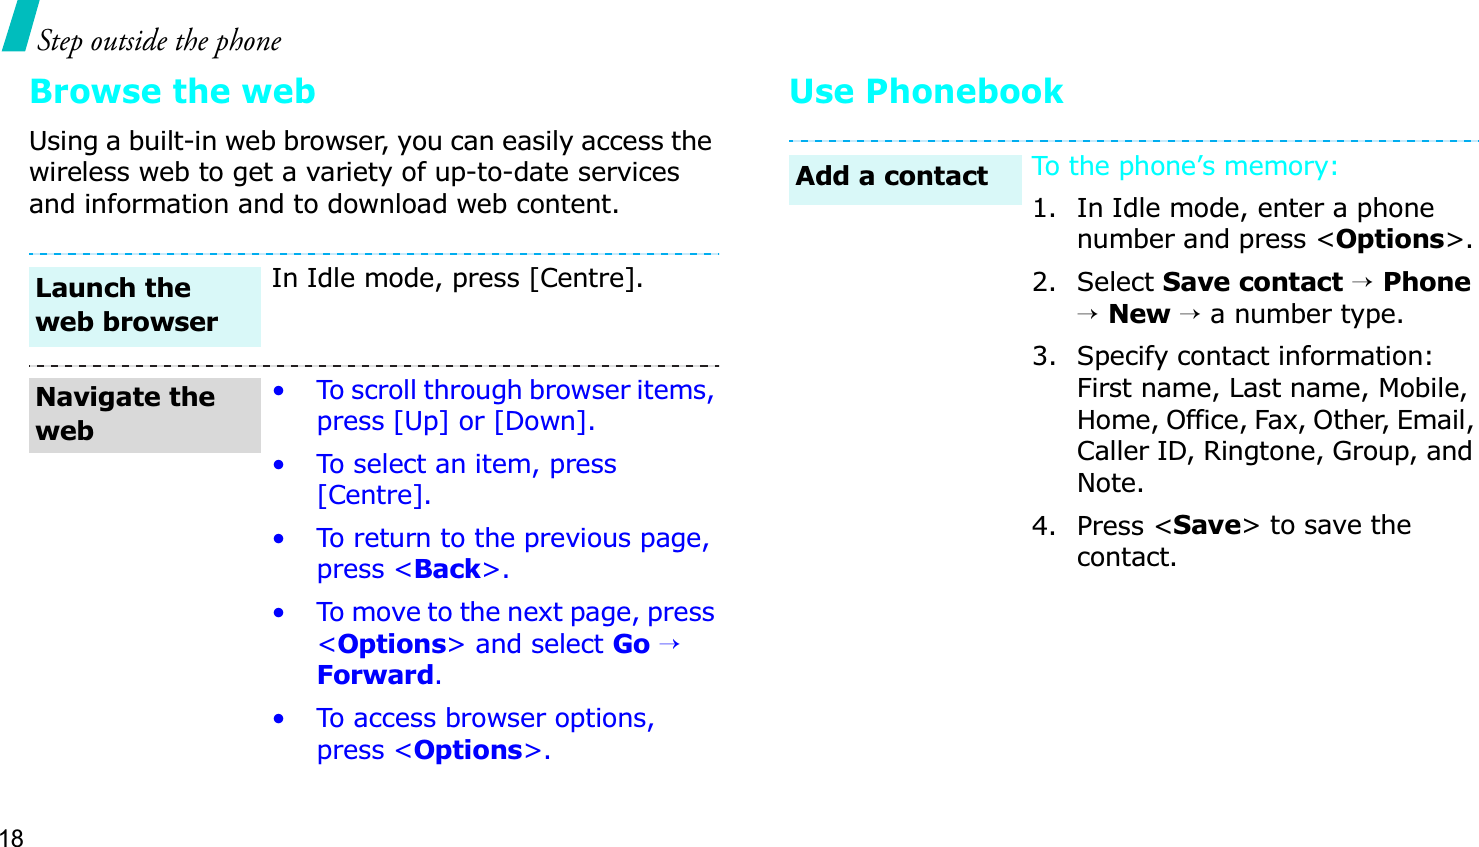 18Step outside the phoneBrowse the webUsing a built-in web browser, you can easily access the wireless web to get a variety of up-to-date services and information and to download web content.Use PhonebookIn Idle mode, press [Centre].• To scroll through browser items, press [Up] or [Down]. • To select an item, press [Centre].• To return to the previous page, press &lt;Back&gt;.• To move to the next page, press &lt;Options&gt; and select Go→Forward.• To access browser options, press &lt;Options&gt;.Launch the web browserNavigate the webTo the phone’s memory:1. In Idle mode, enter a phone number and press &lt;Options&gt;.2. Select Save contact→Phone→New→ a number type.3. Specify contact information: First name, Last name, Mobile, Home, Office, Fax, Other, Email, Caller ID, Ringtone, Group, and Note.4. Press &lt;Save&gt; to save the contact.Add a contact